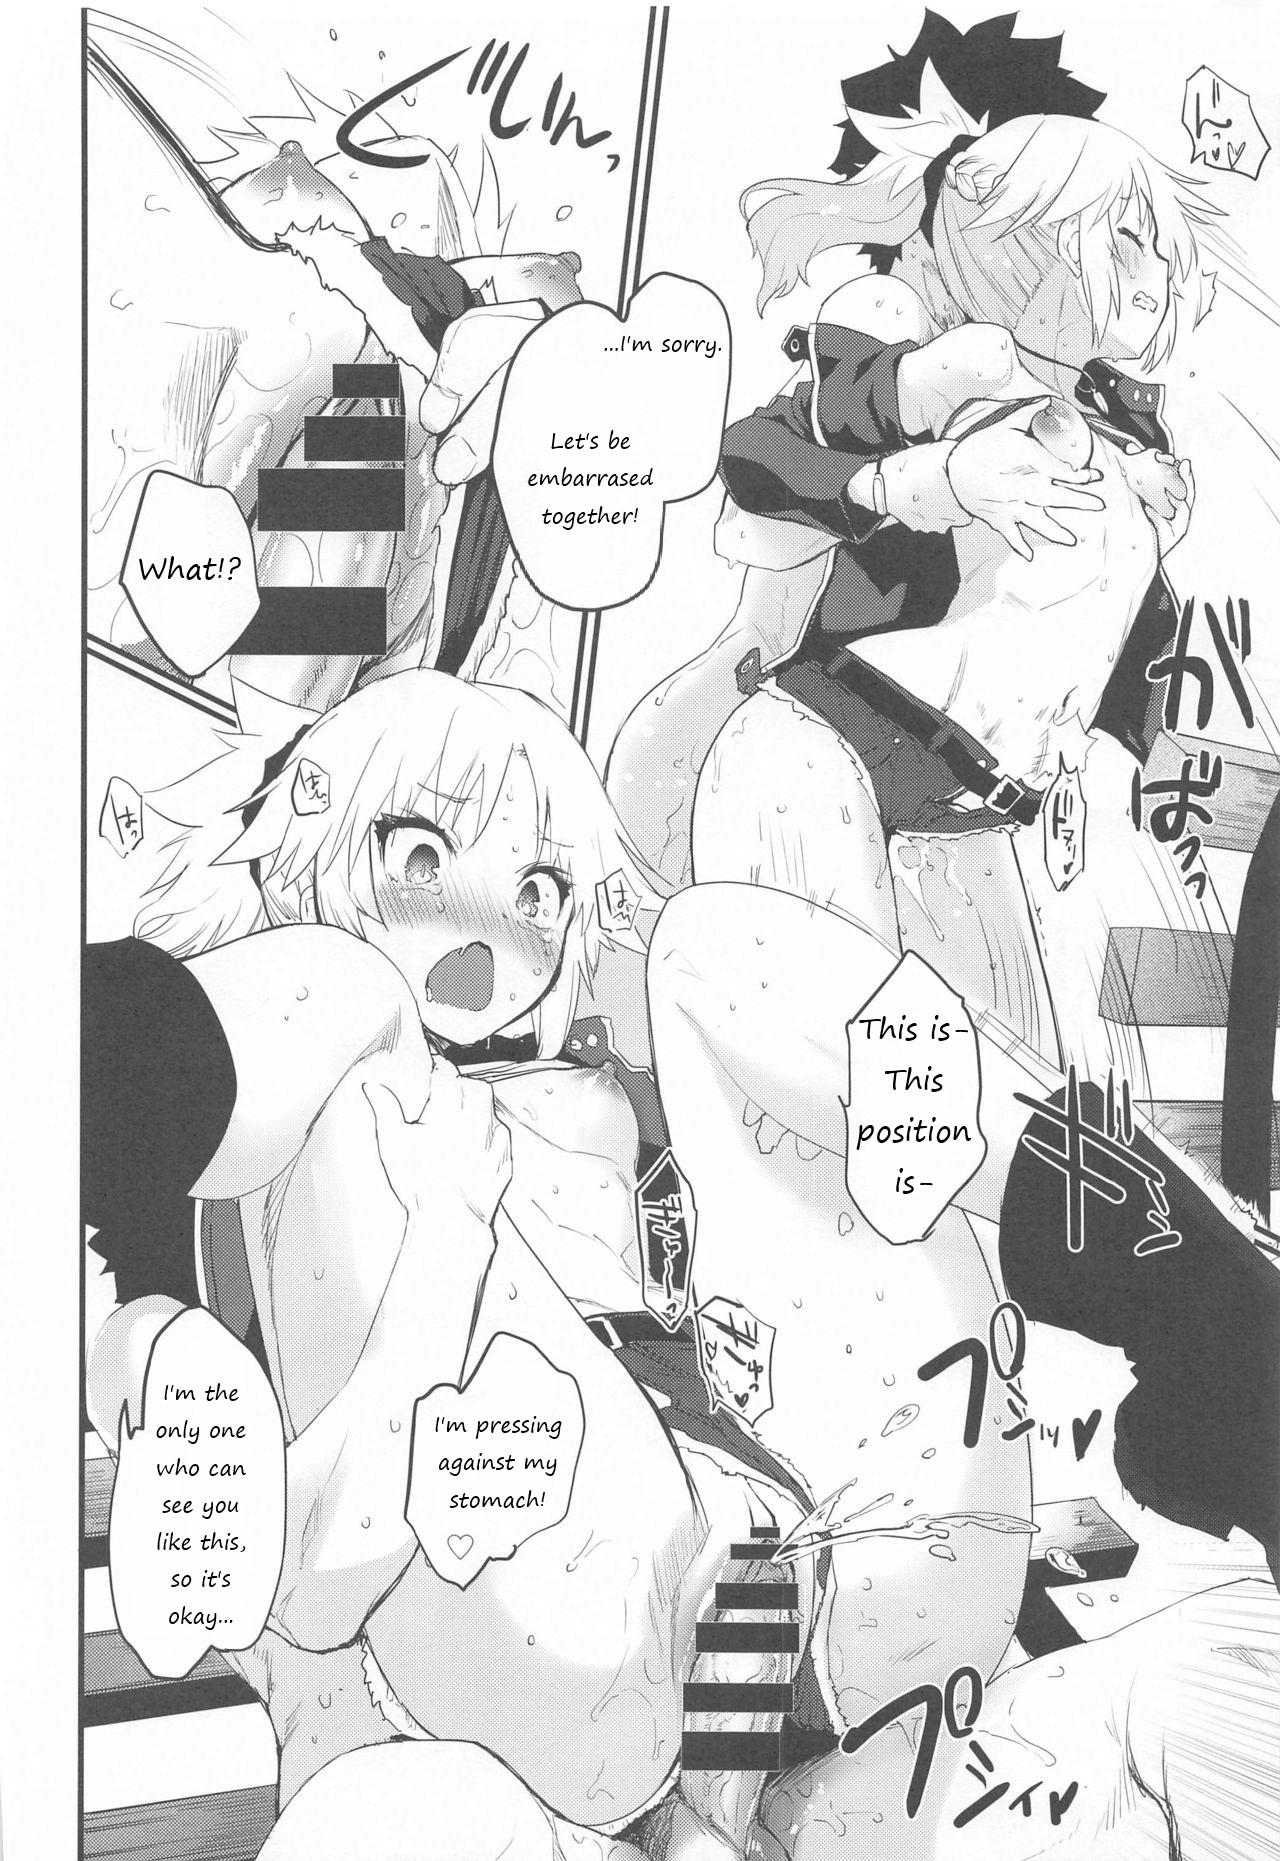 Butthole Memory of Honey Night - Fate grand order Webcams - Page 13